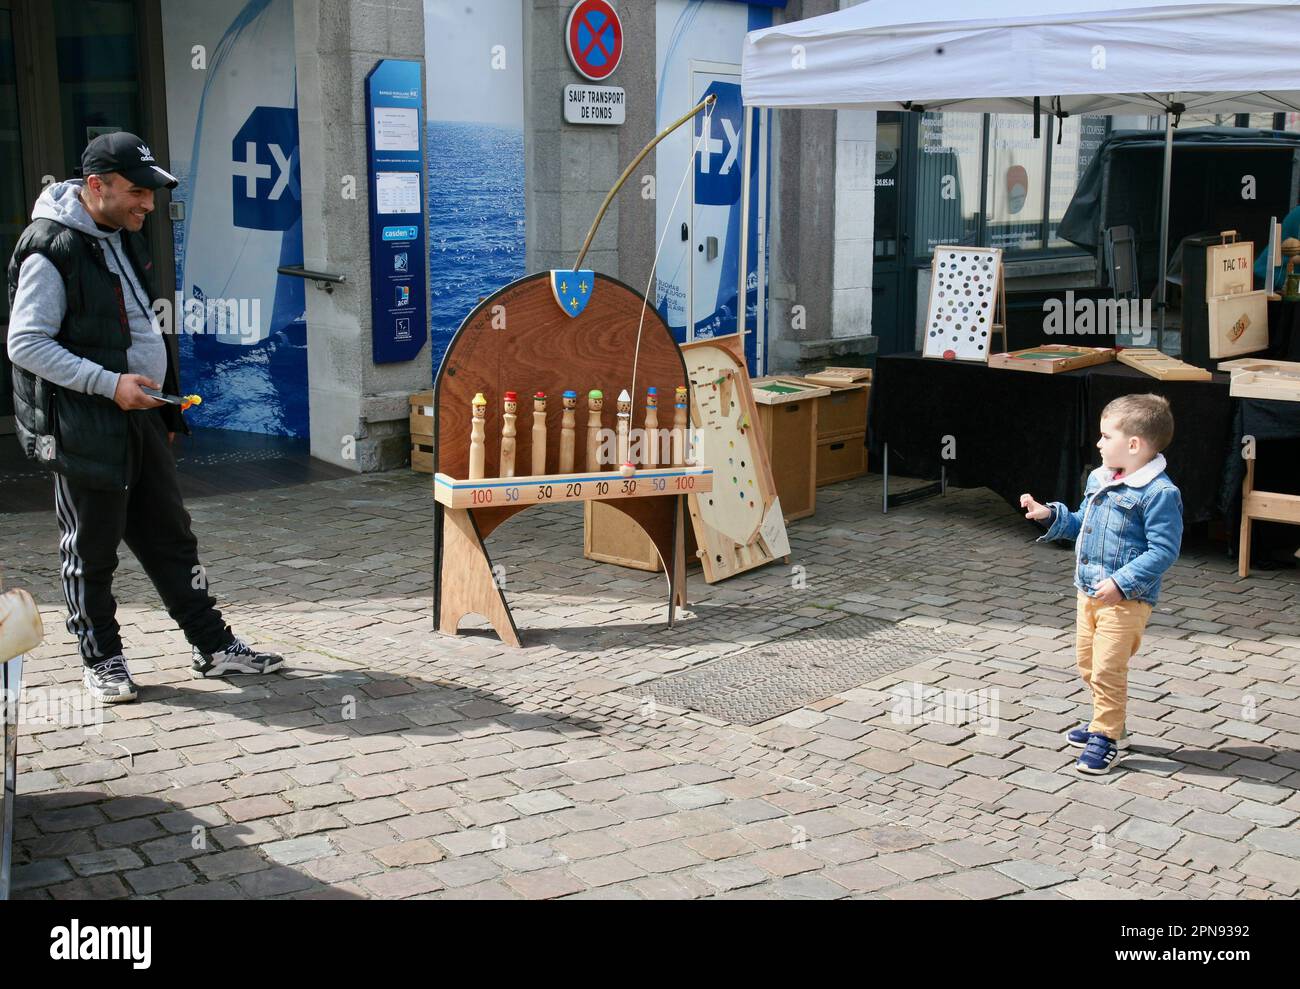 A young boy playing skittles in the town centre, Domfront en Poiraie, Normandy, France, Europe Stock Photo